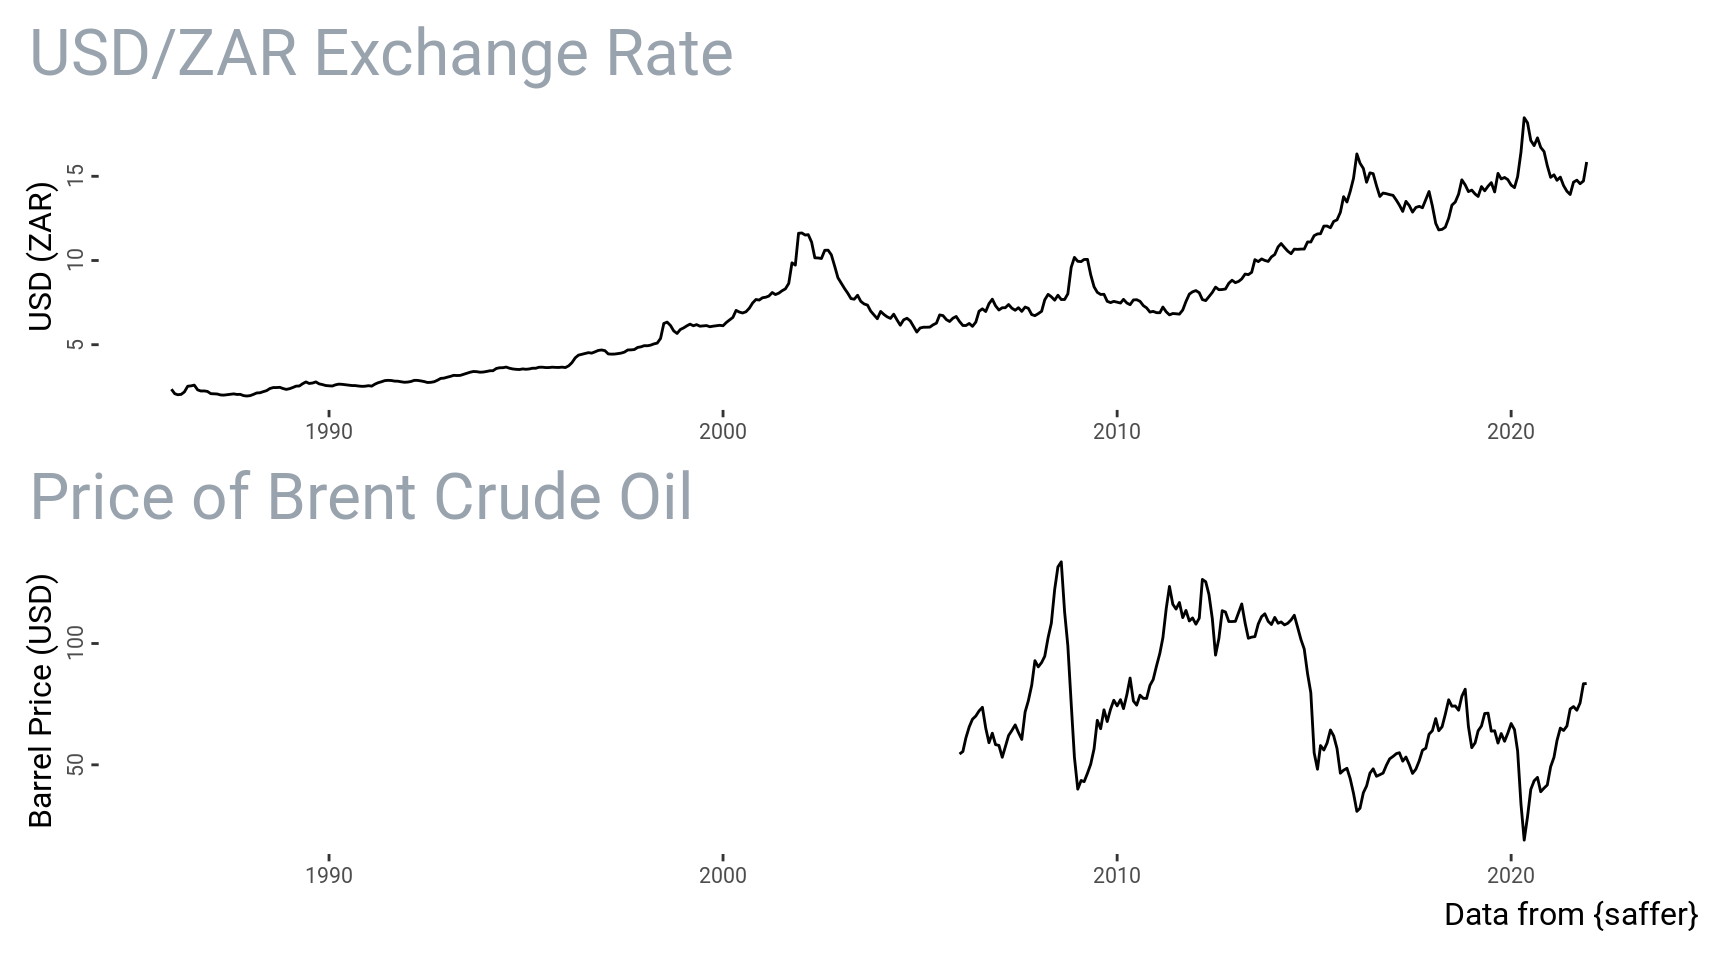 The USD/ZAR exchange rate and price of Brent Crude Oil versus time.